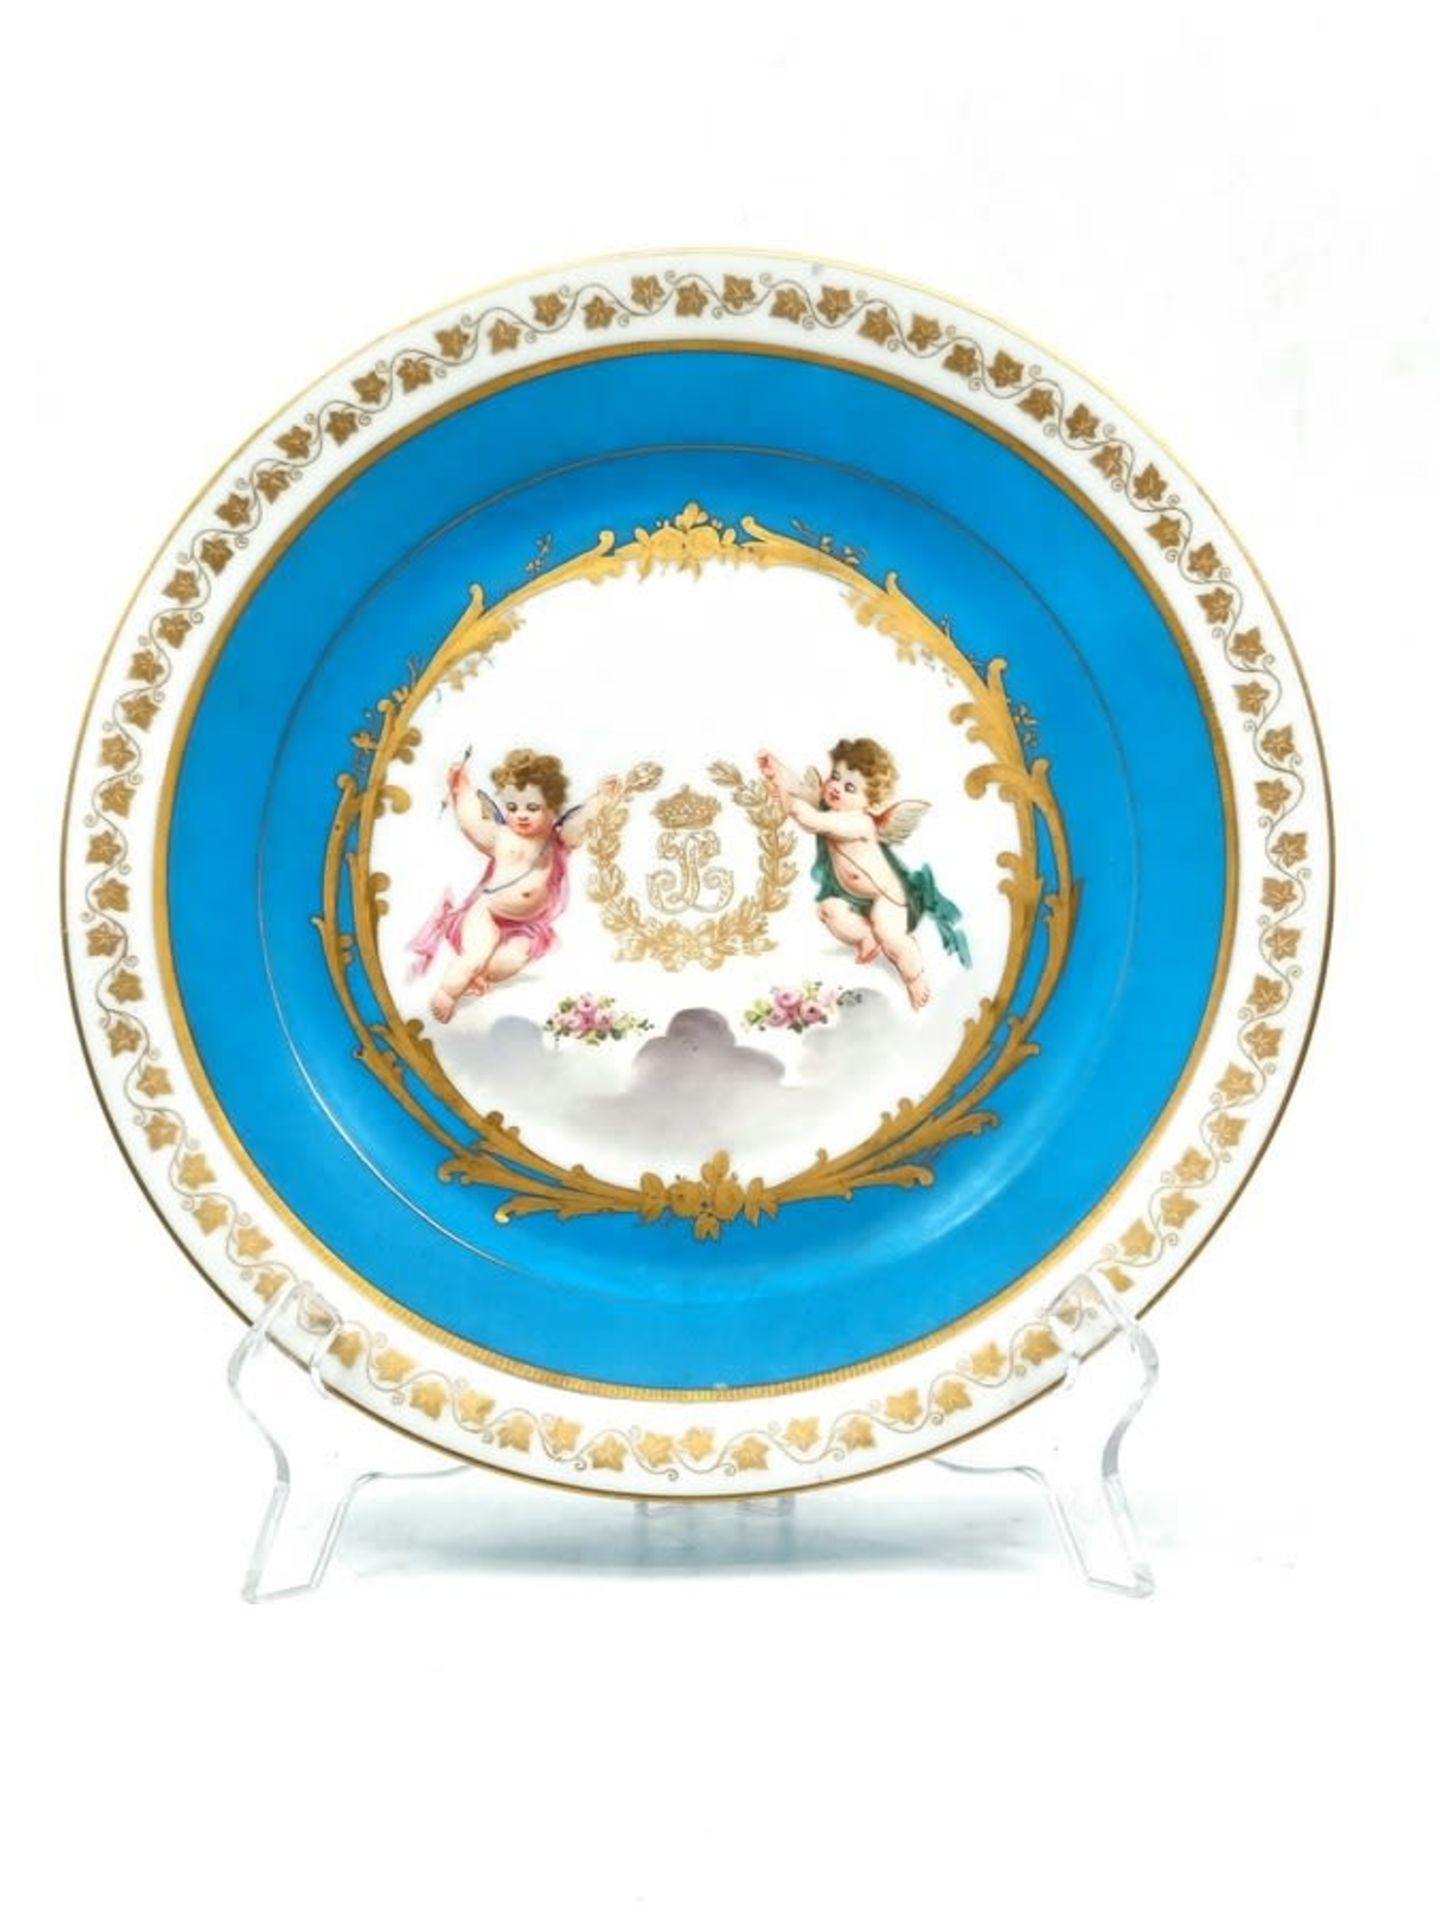 An antique French porcelain plate made by 'Sevres', made in 1876, decorated with hand paintings in